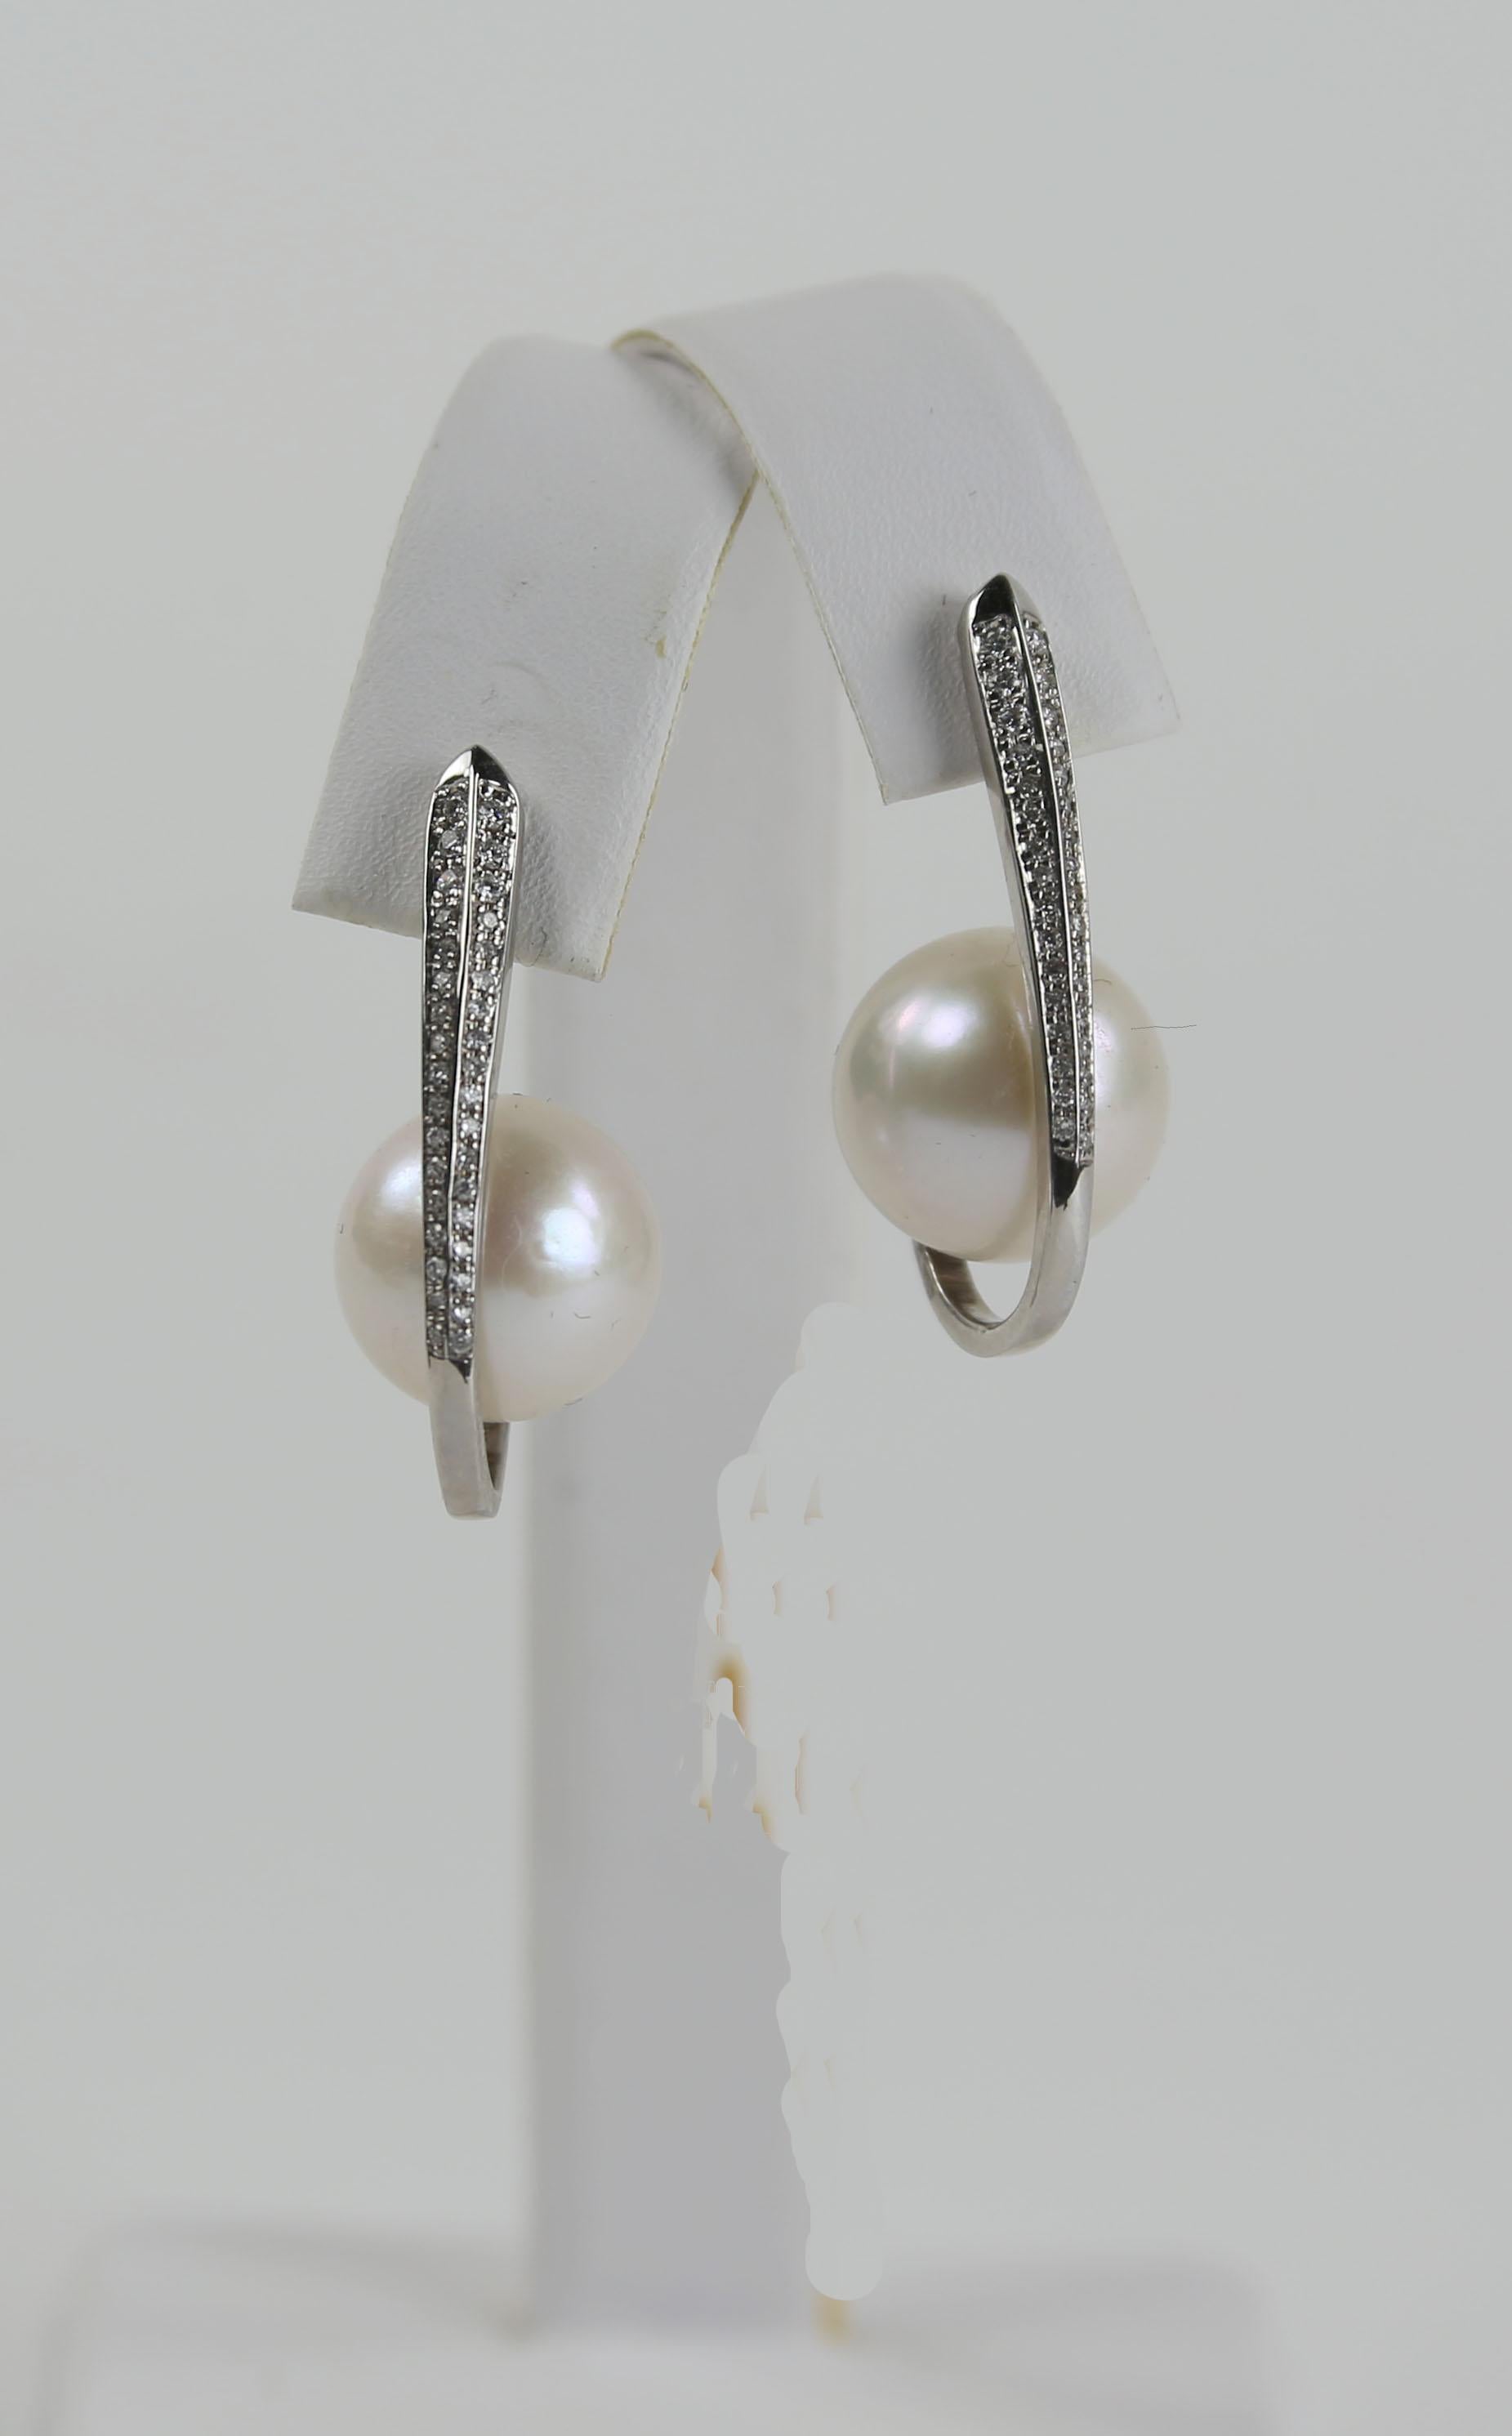 Simply Beautiful! Elegant and Stylish 13.5mm White Luminous South Sea Pearl and Diamond Earrings. Hand crafted in 18K White Gold. Each earring is accented with shimmering Round Brilliant-cut Diamonds, weighing approx. 0.25 carat (0.50 total carat